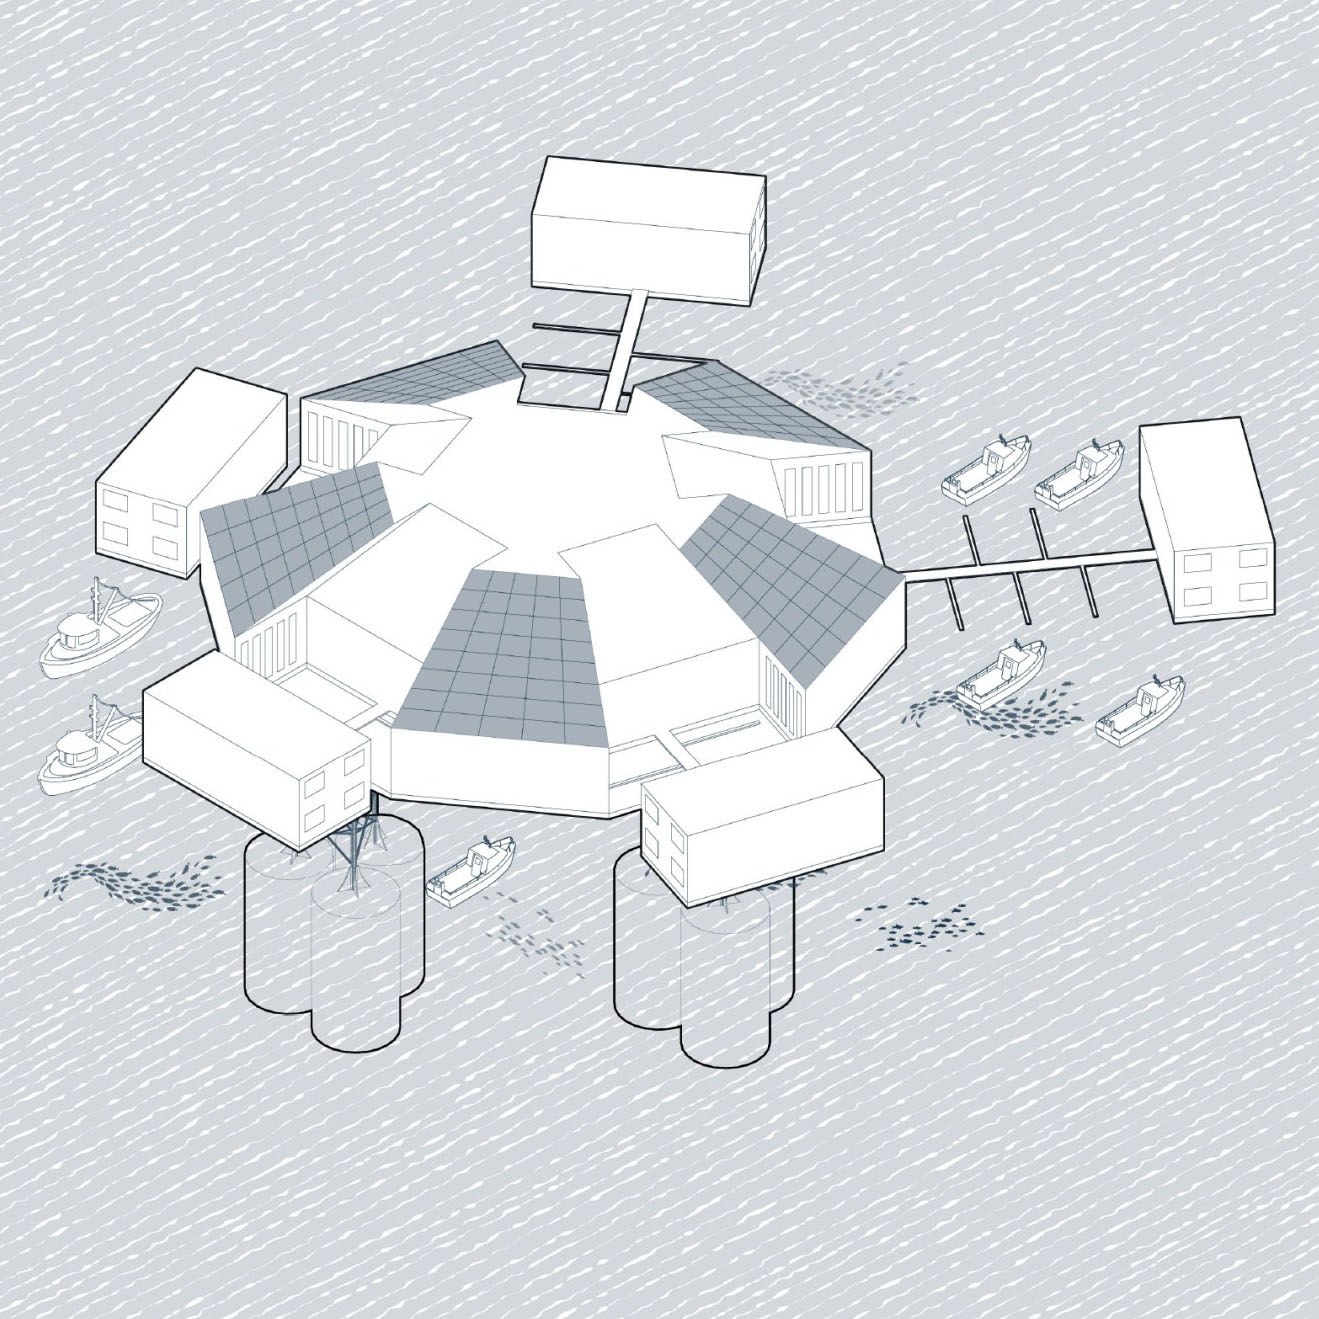 Axonometric drawing of a floating hexagonal research building, drawn by a student for the Gulf Research Studio.